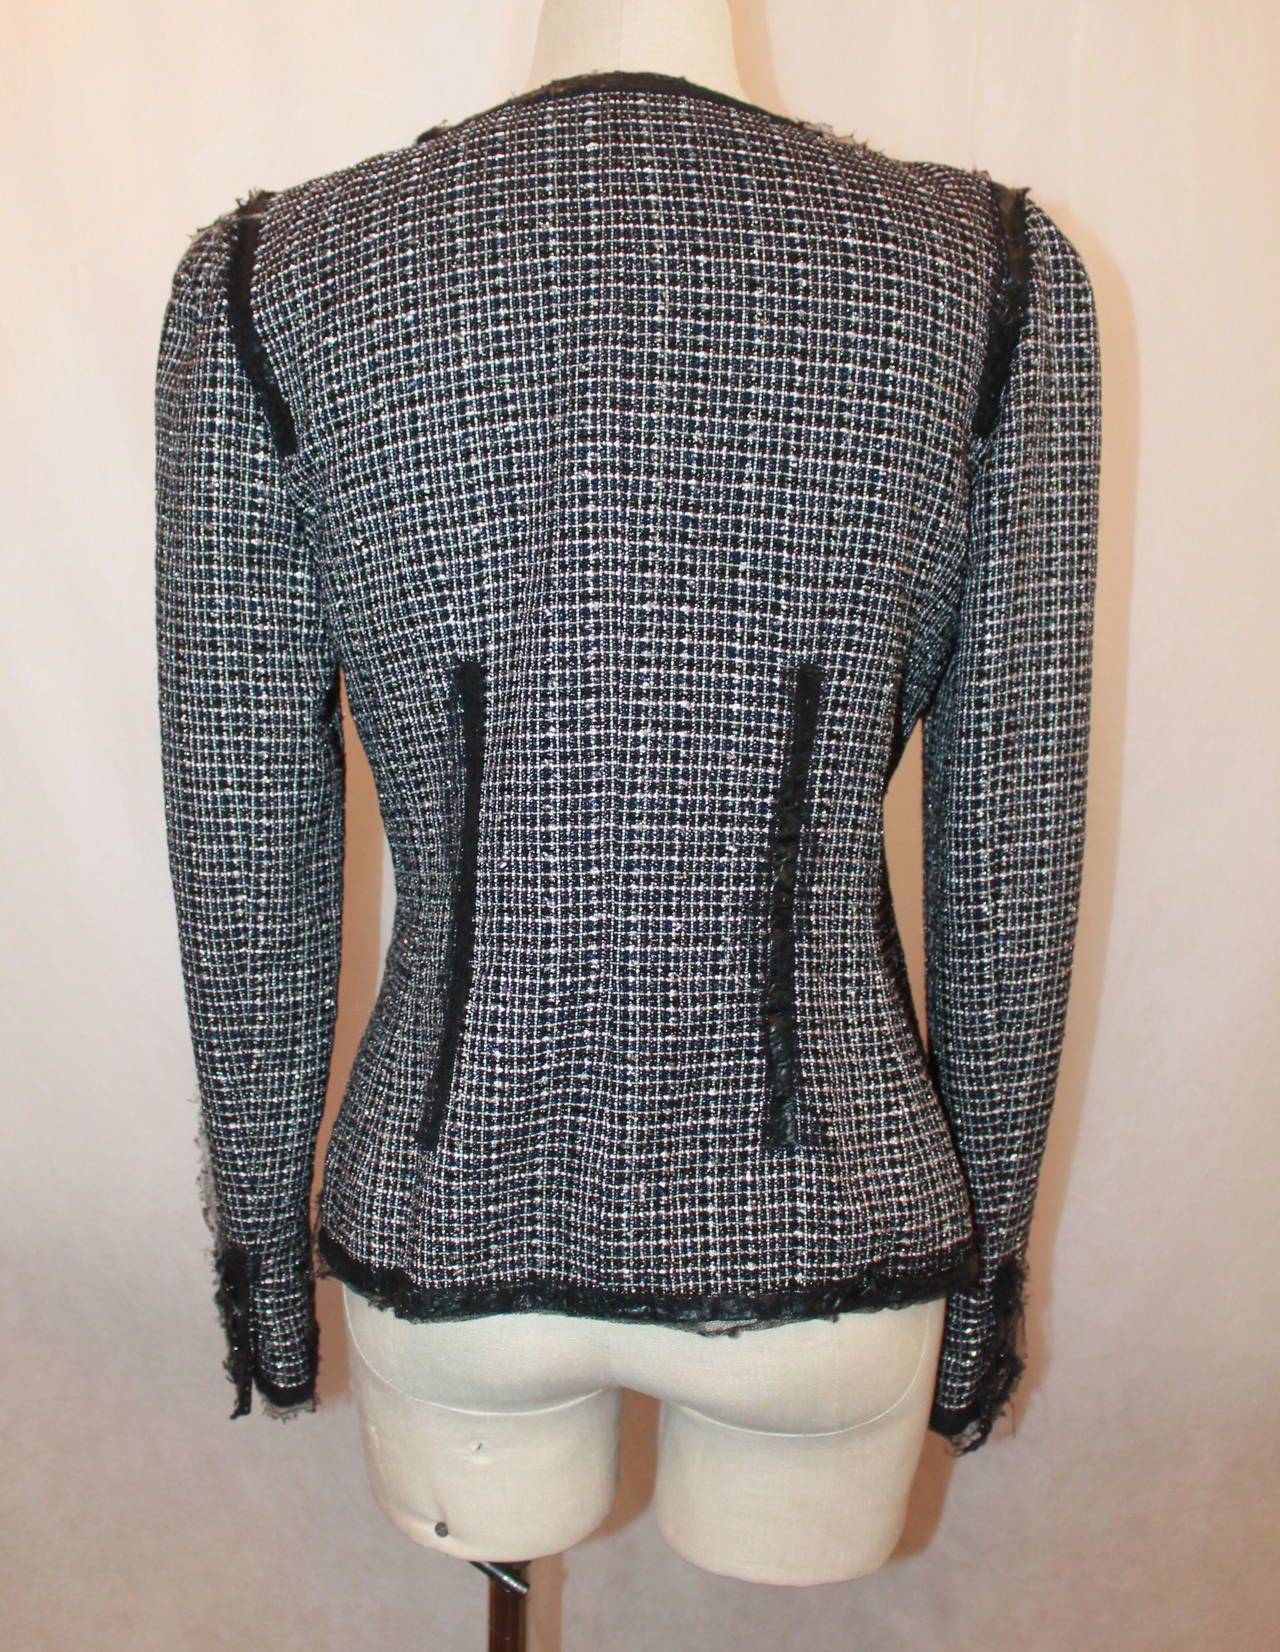 Chanel 2009 Black, White, Pink Tweed Jacket with Patent Detail - 40 2